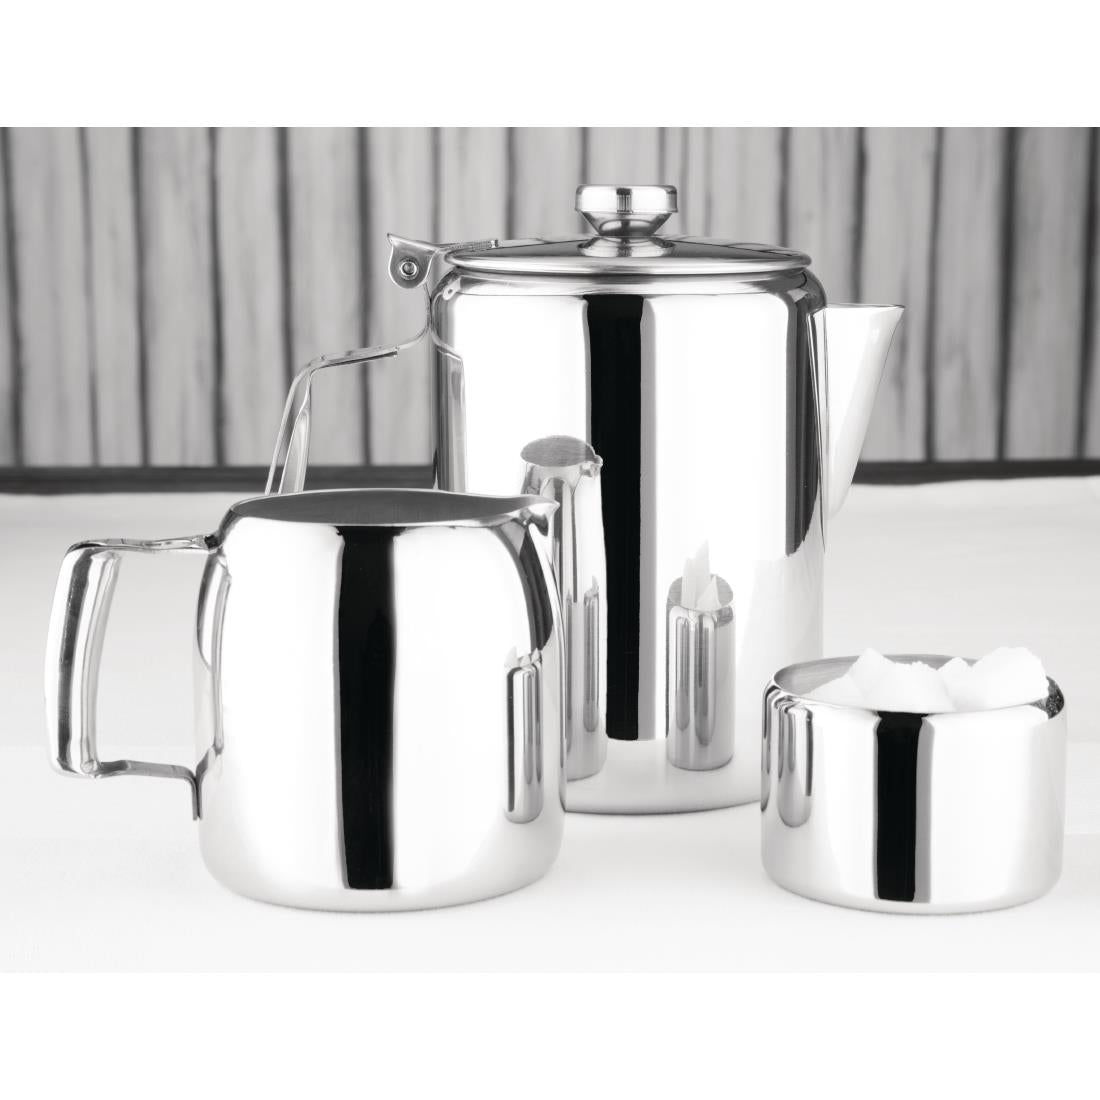 Olympia Concorde Stainless Steel Sugar Bowl